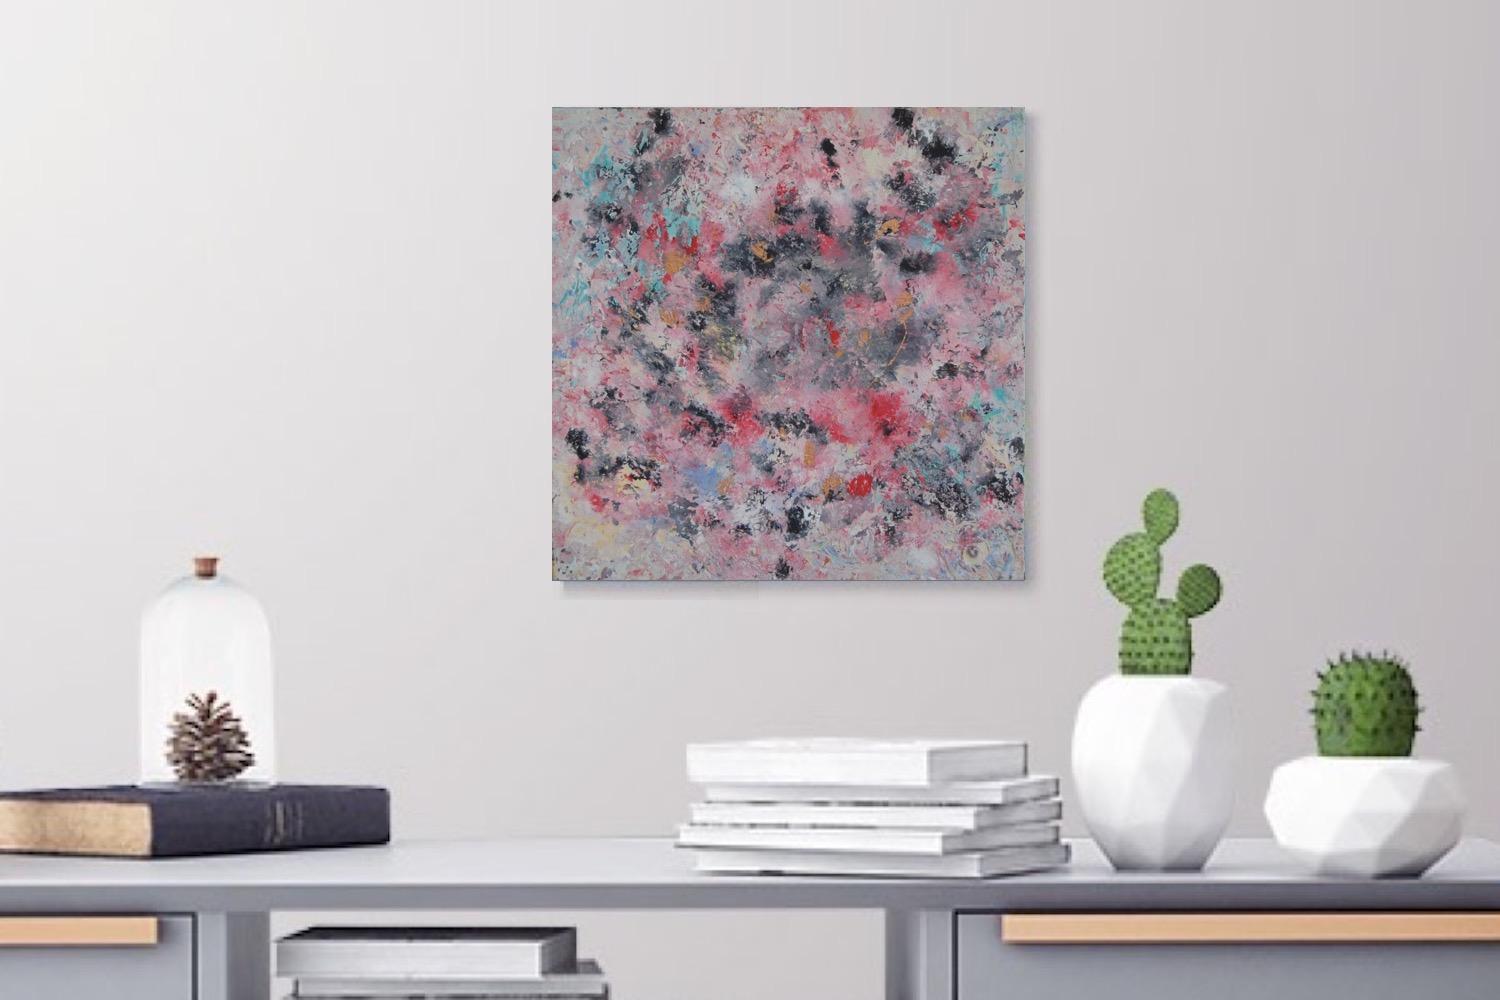 Snow Deep - abstract acrylic painting original canvas art in impressionist pastel rose pink hues, impasto textures, floral, cherry blossoms